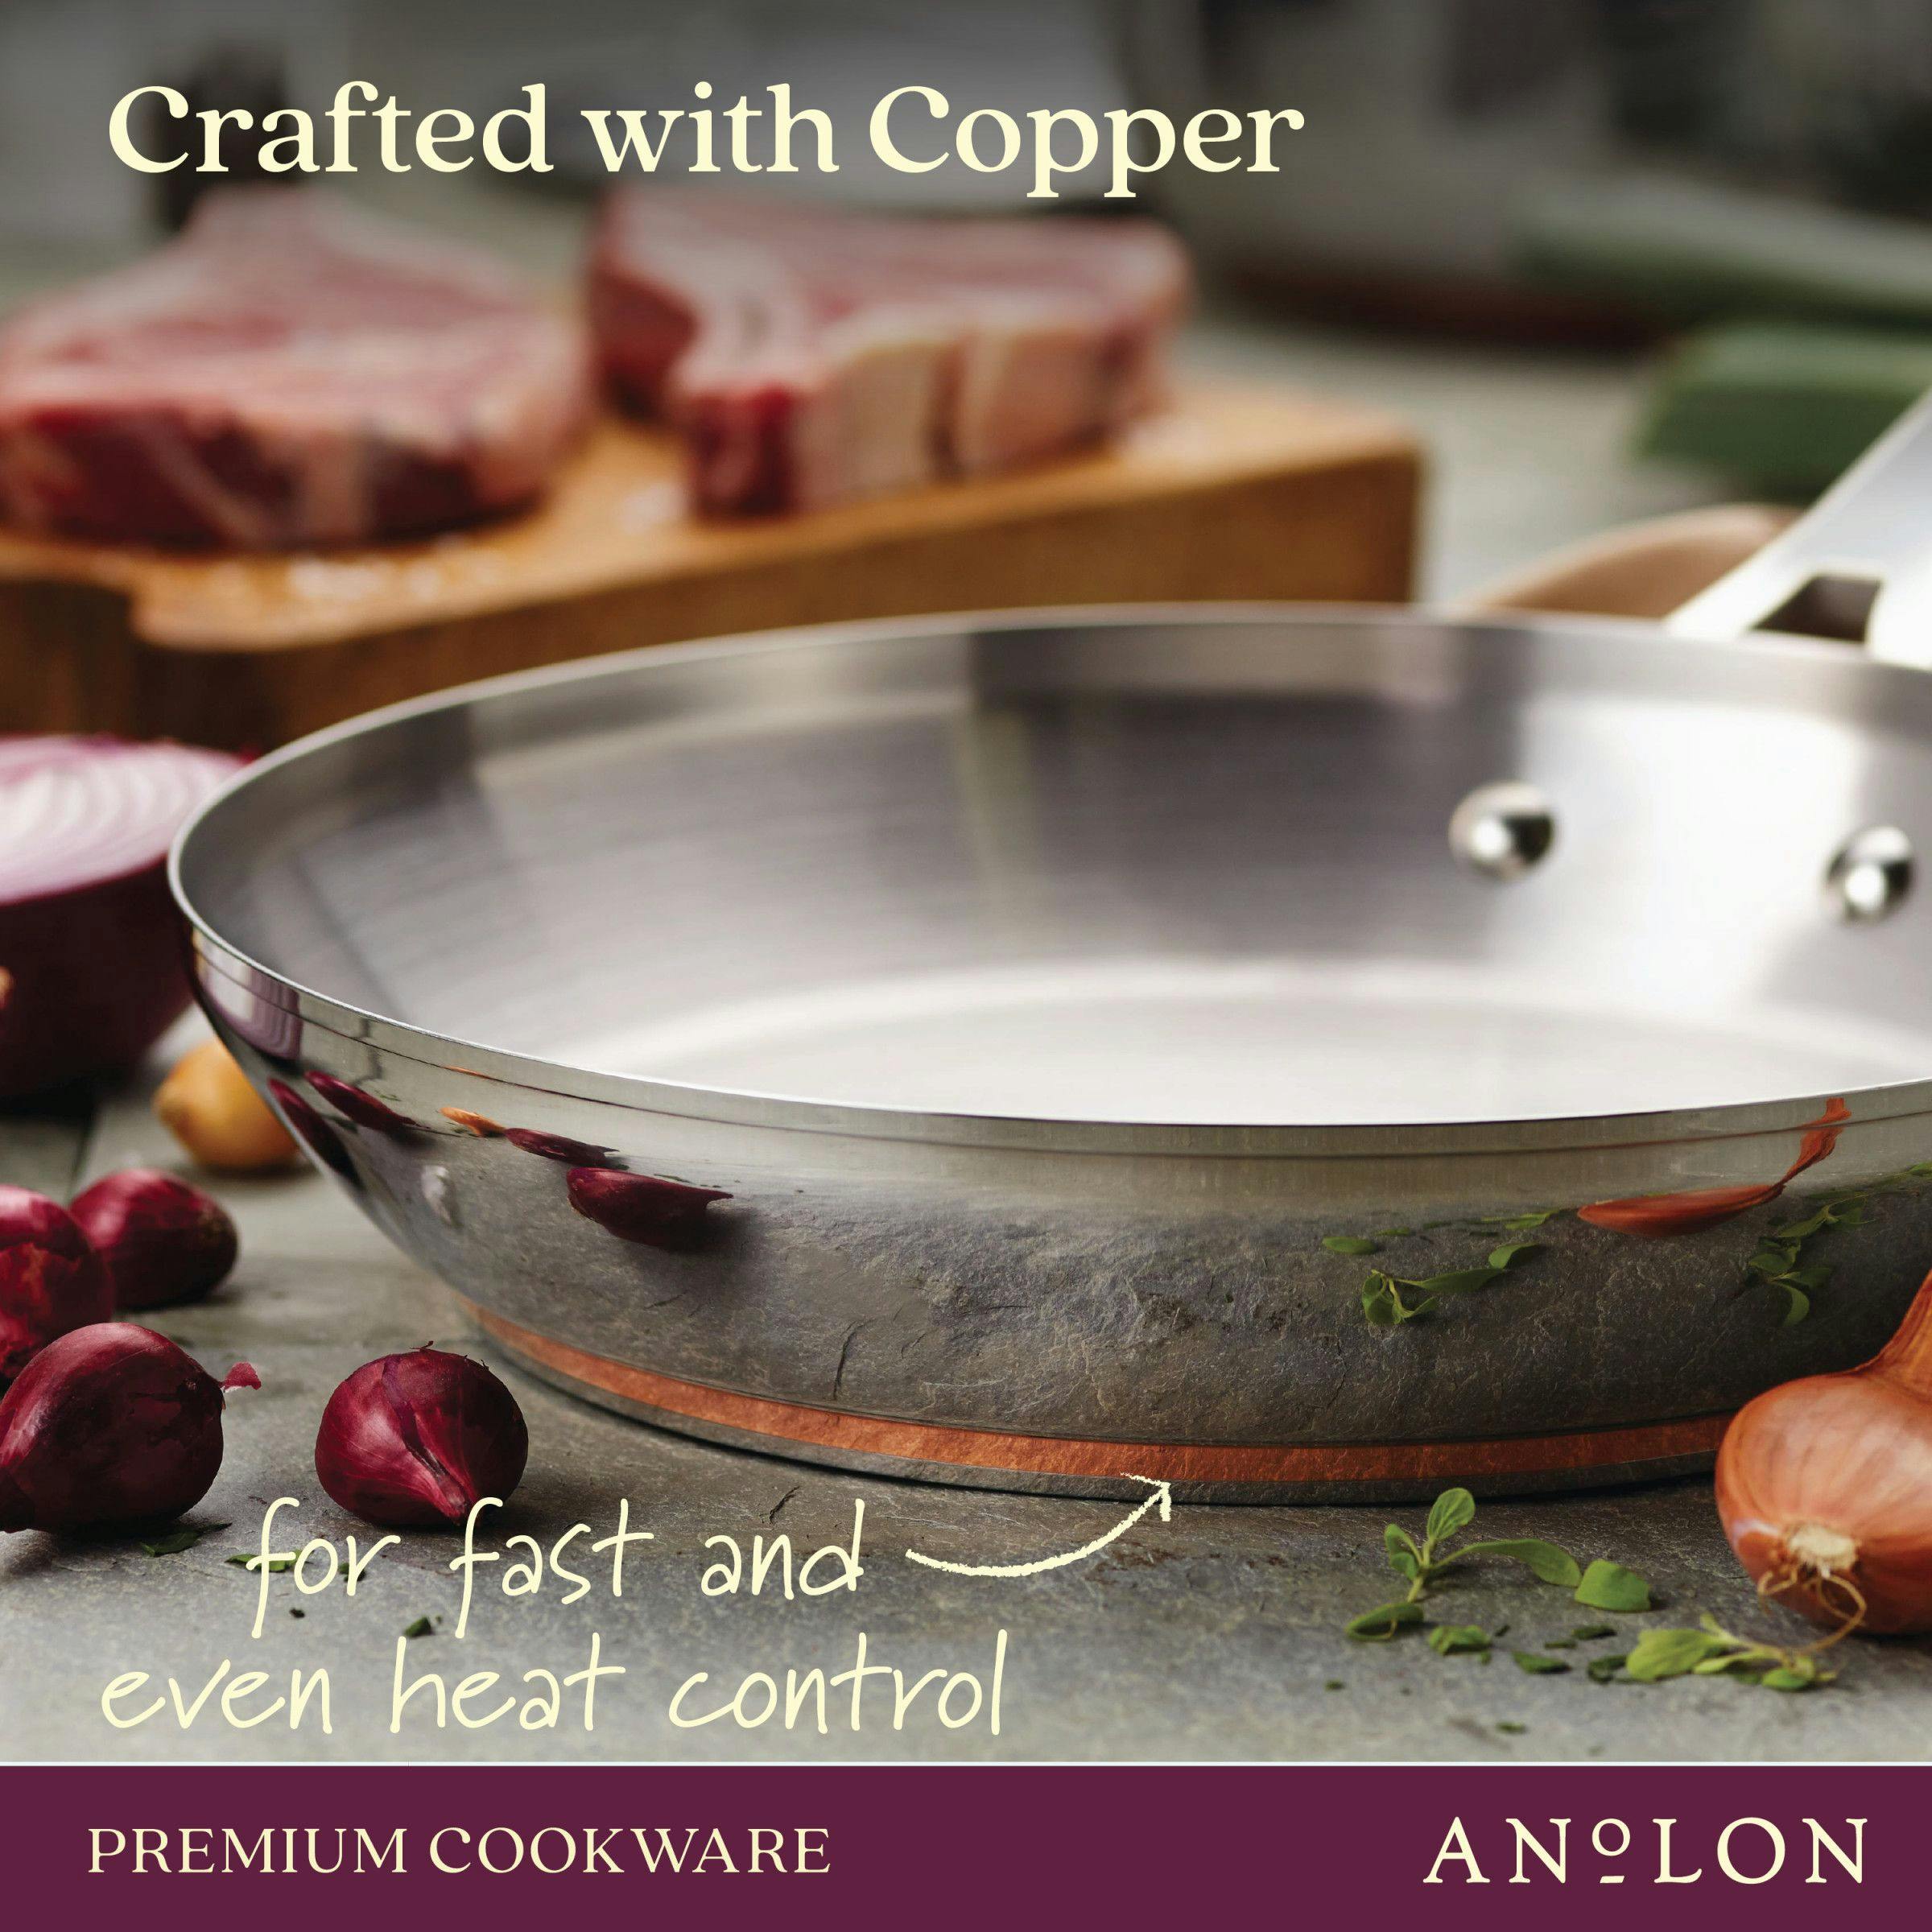 Anolon Nouvelle Copper Stainless Steel Saucepan with Lid, 3.5-Quart, Silver